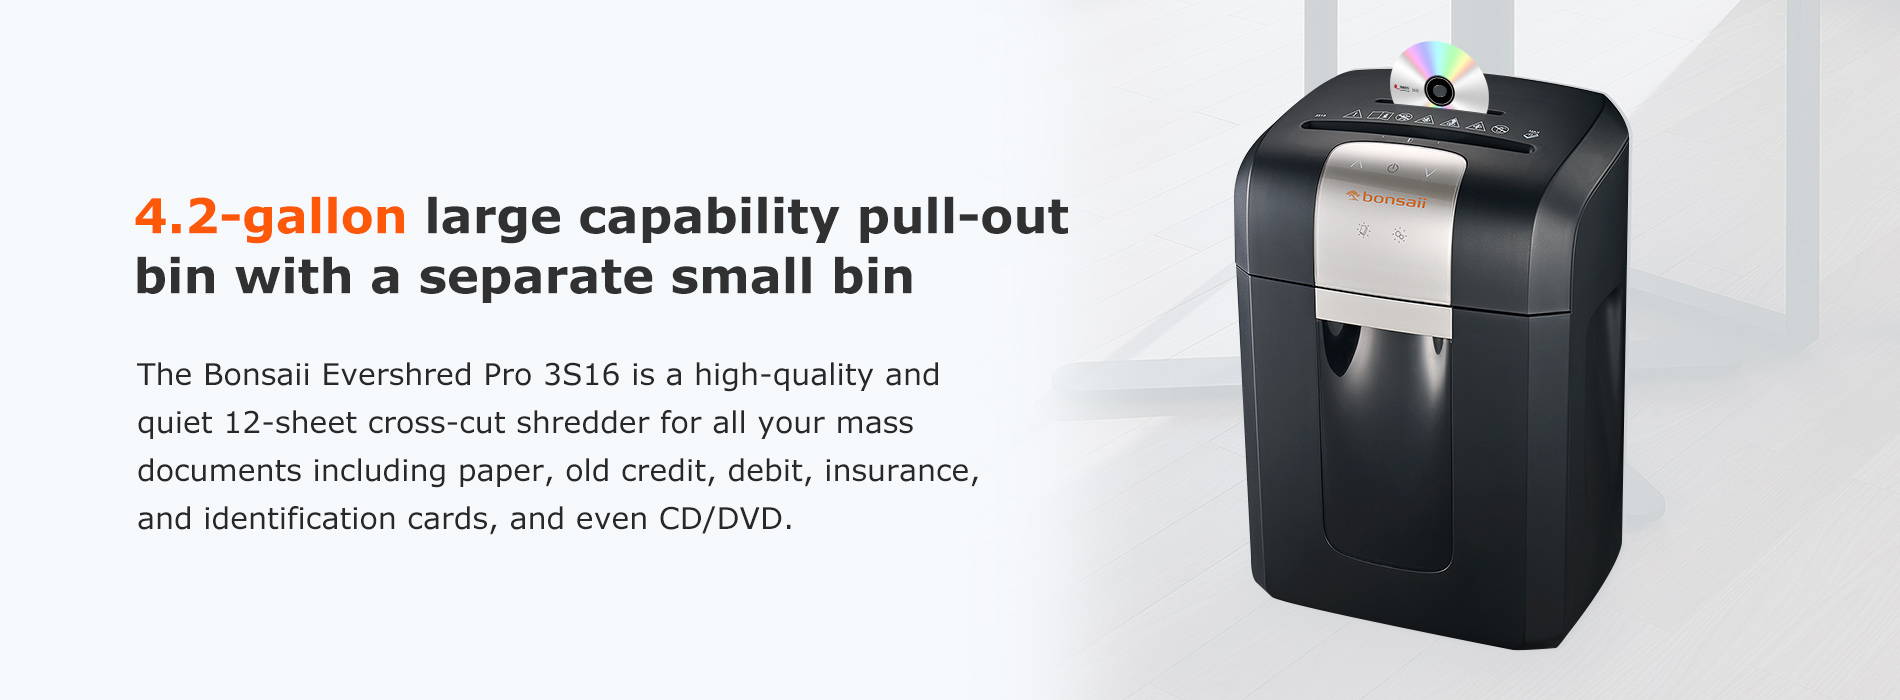 4.2-gallon large capability pull-out bin with a separate small bin The Bonsaii Evershred Pro 3S16 is a high-quality and quiet 12-sheet cross-cut shredder for all your mass documents including paper, old credit, debit, insurance, and identification cards, and even CD/DVD.